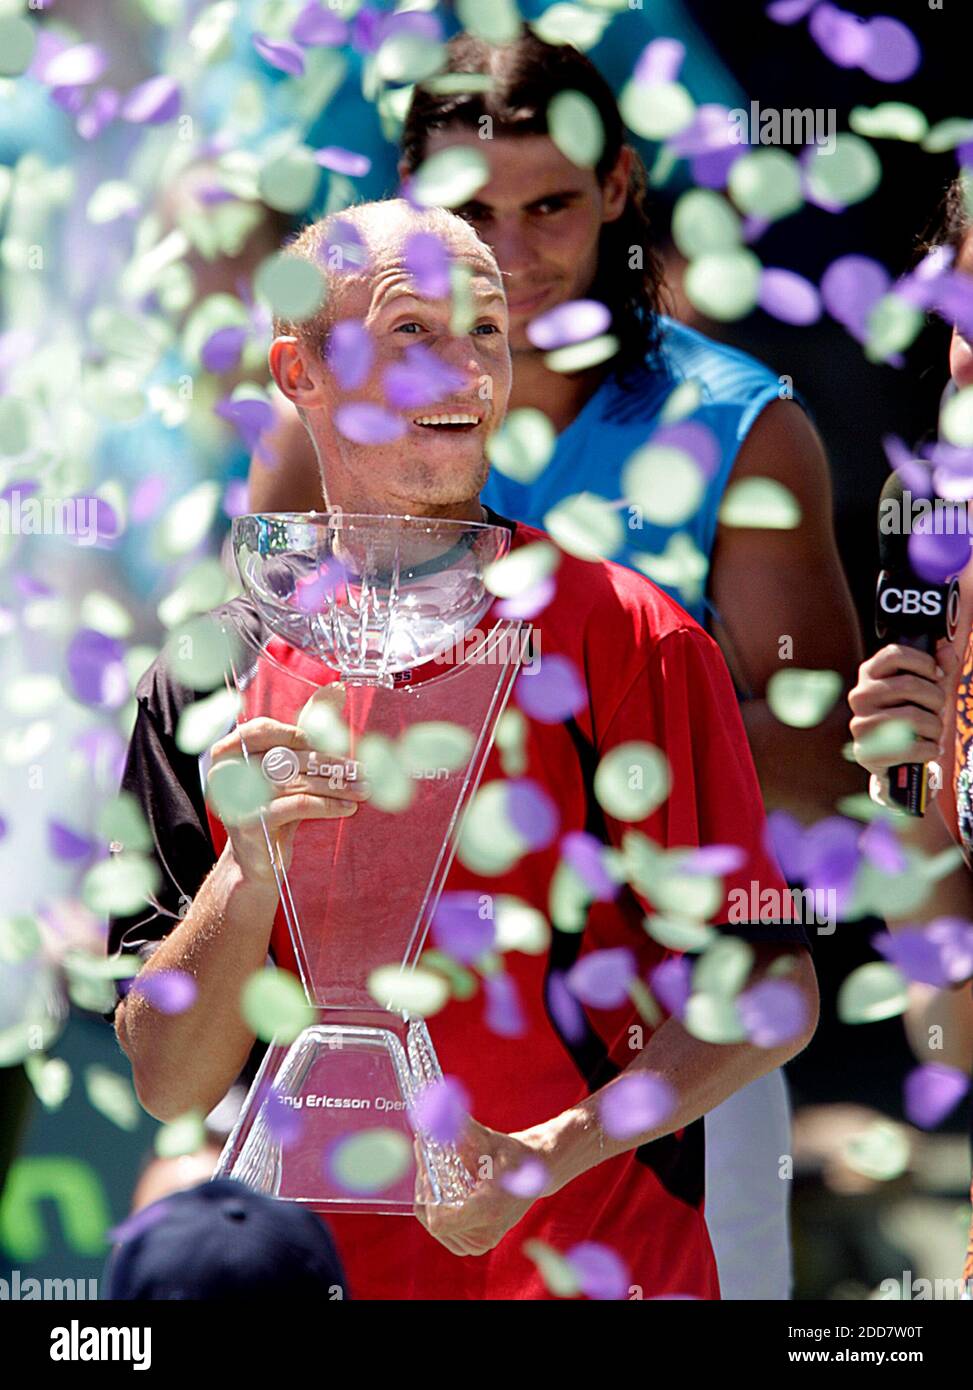 Russia's Nikolai Davydenko holds his trophy after defeats, 6-4, 6-2, Spain's Rafael Nadal in their final match of the Sony Ericsson Open at the Crandon Park Tennis Center in Key Biscayne, FL, USA on April 6, 2008. Photo by Patrick Farrell/Miami Herald/MCT/Cameleon/ABACAPRESS.COM Stock Photo